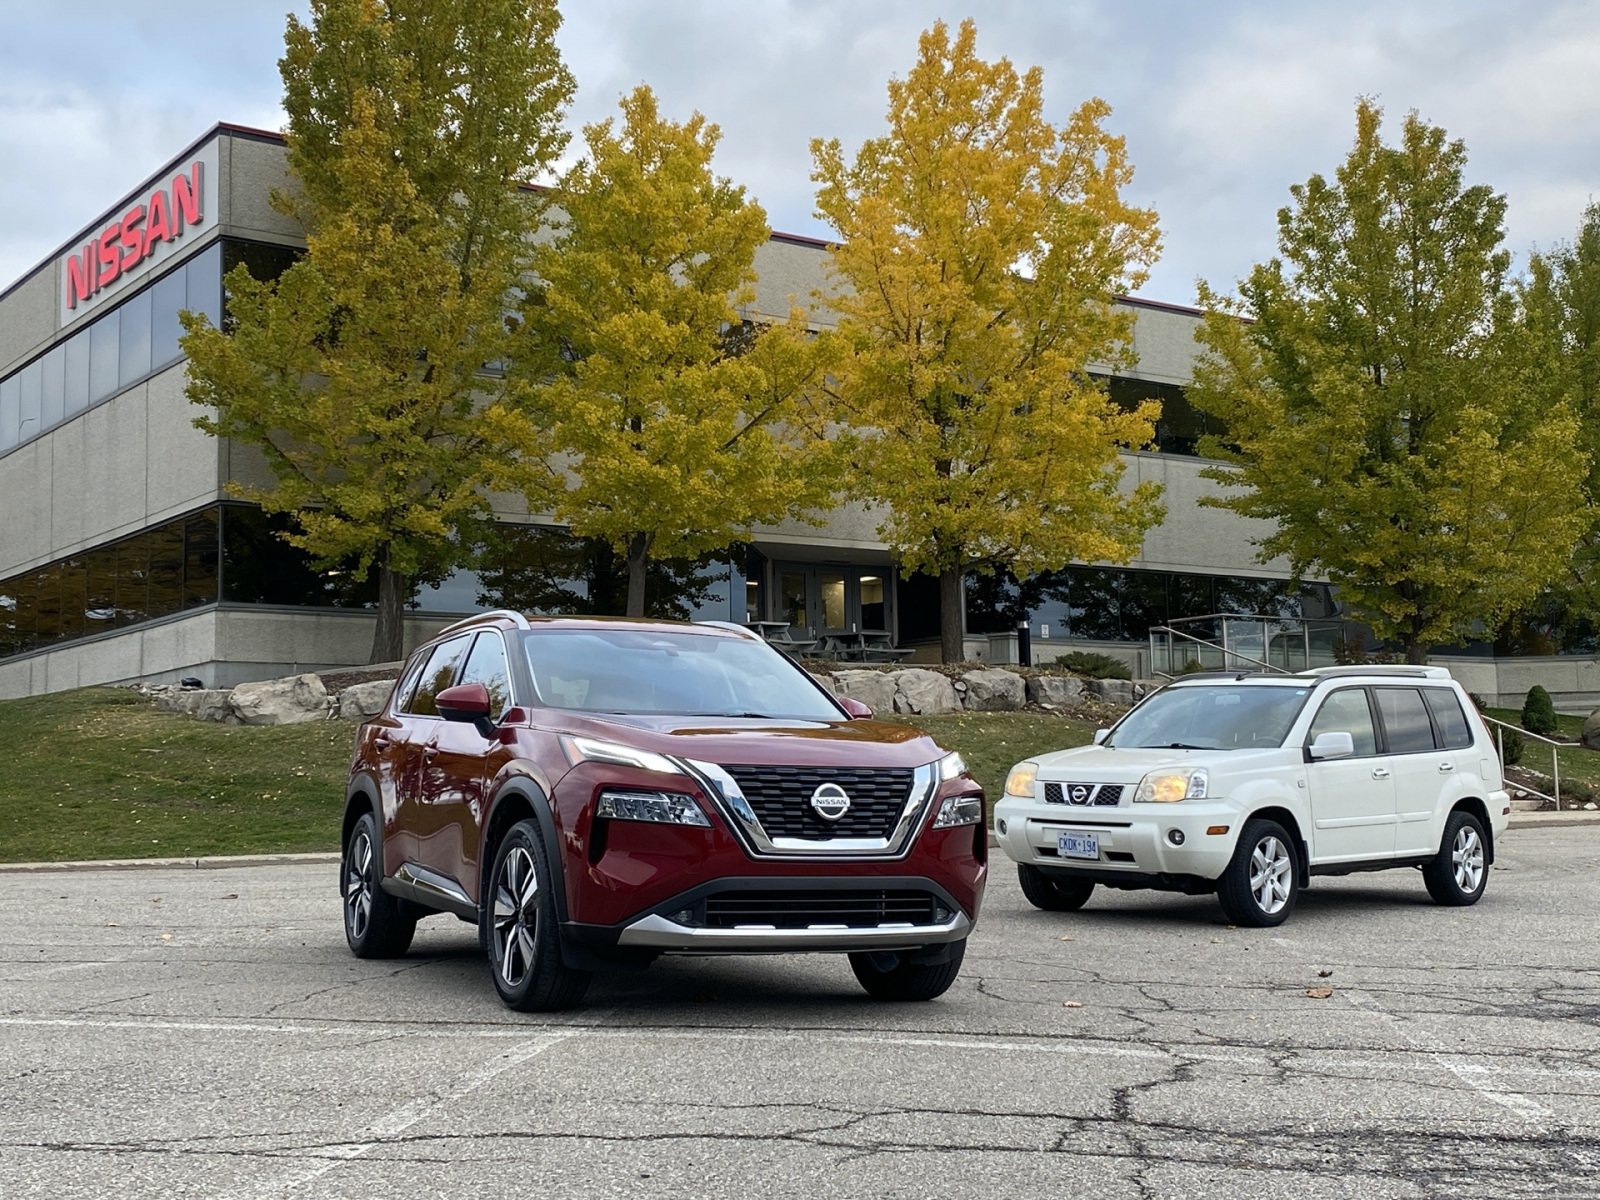 Jeff Wyler Eastgate Nissan - Ohio, Kentucky and Indiana's BEST selection of NEW NISSAN's 

Visit: ww Jeff Wyler Nissan Batavia (513)943-5405